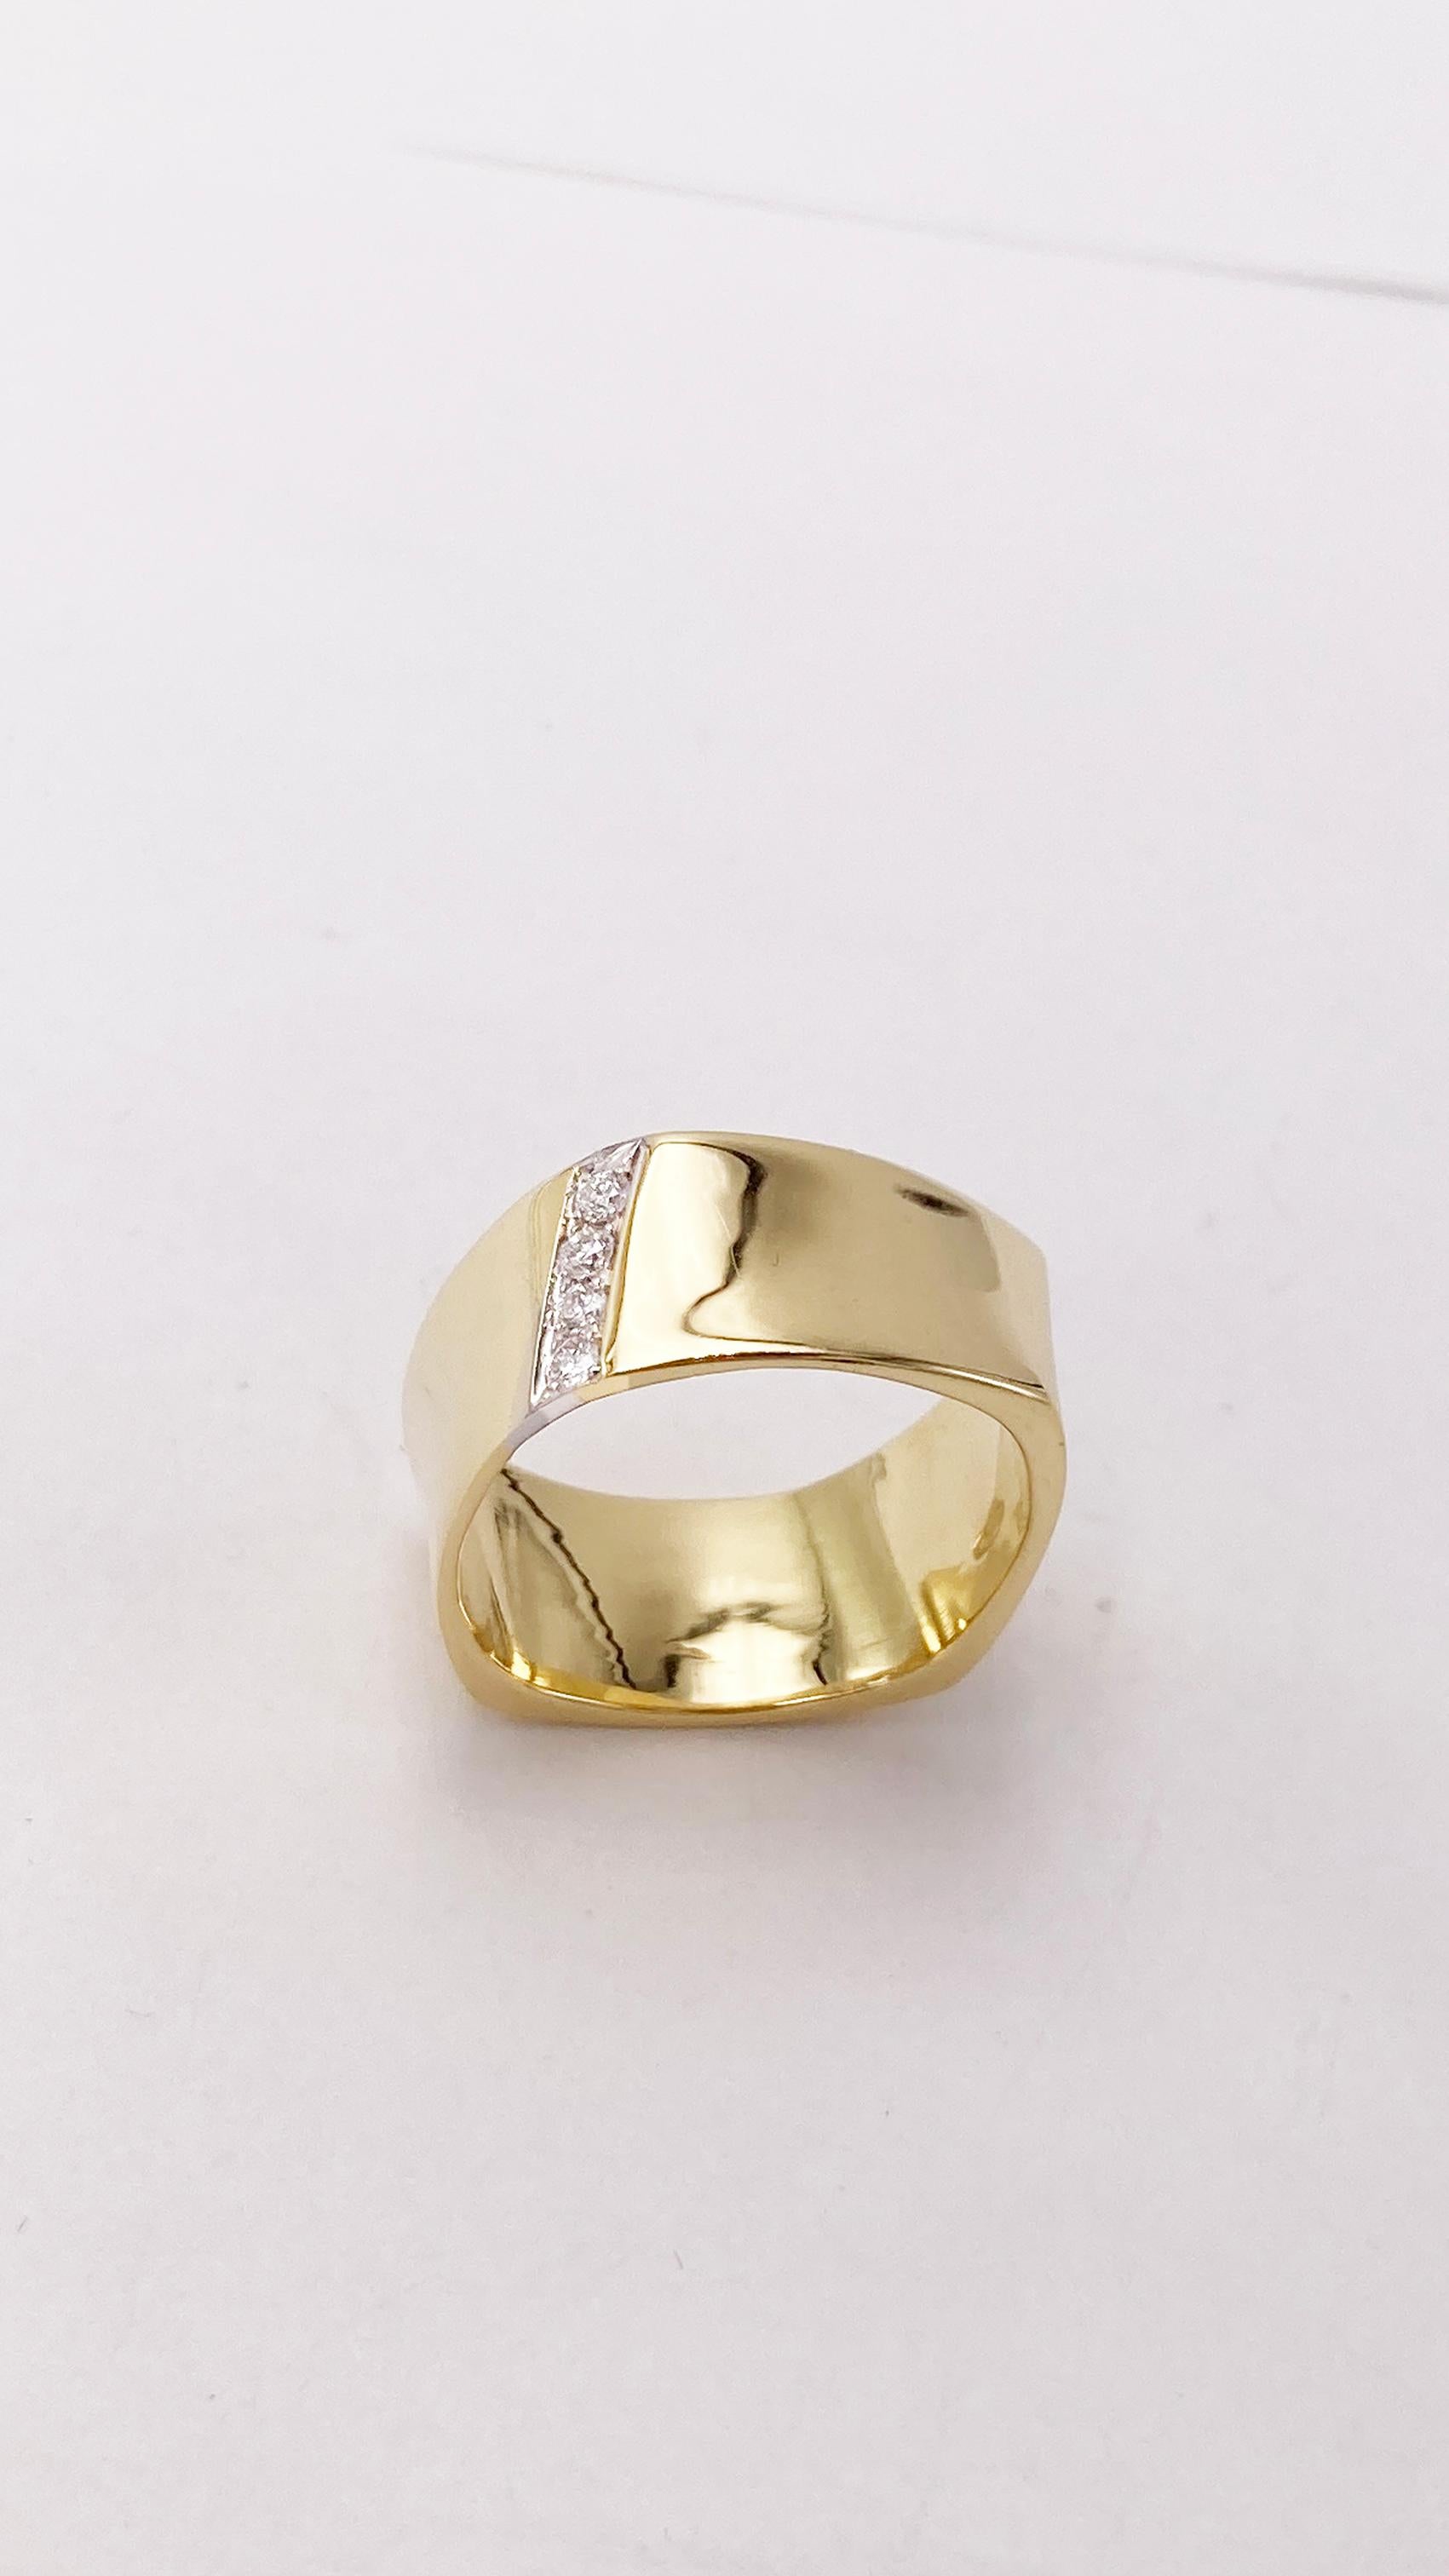 Brilliant Cut Rossella Ugolini 18K Yellow Gold White Diamonds Band Ring Handcrafted in Italy For Sale